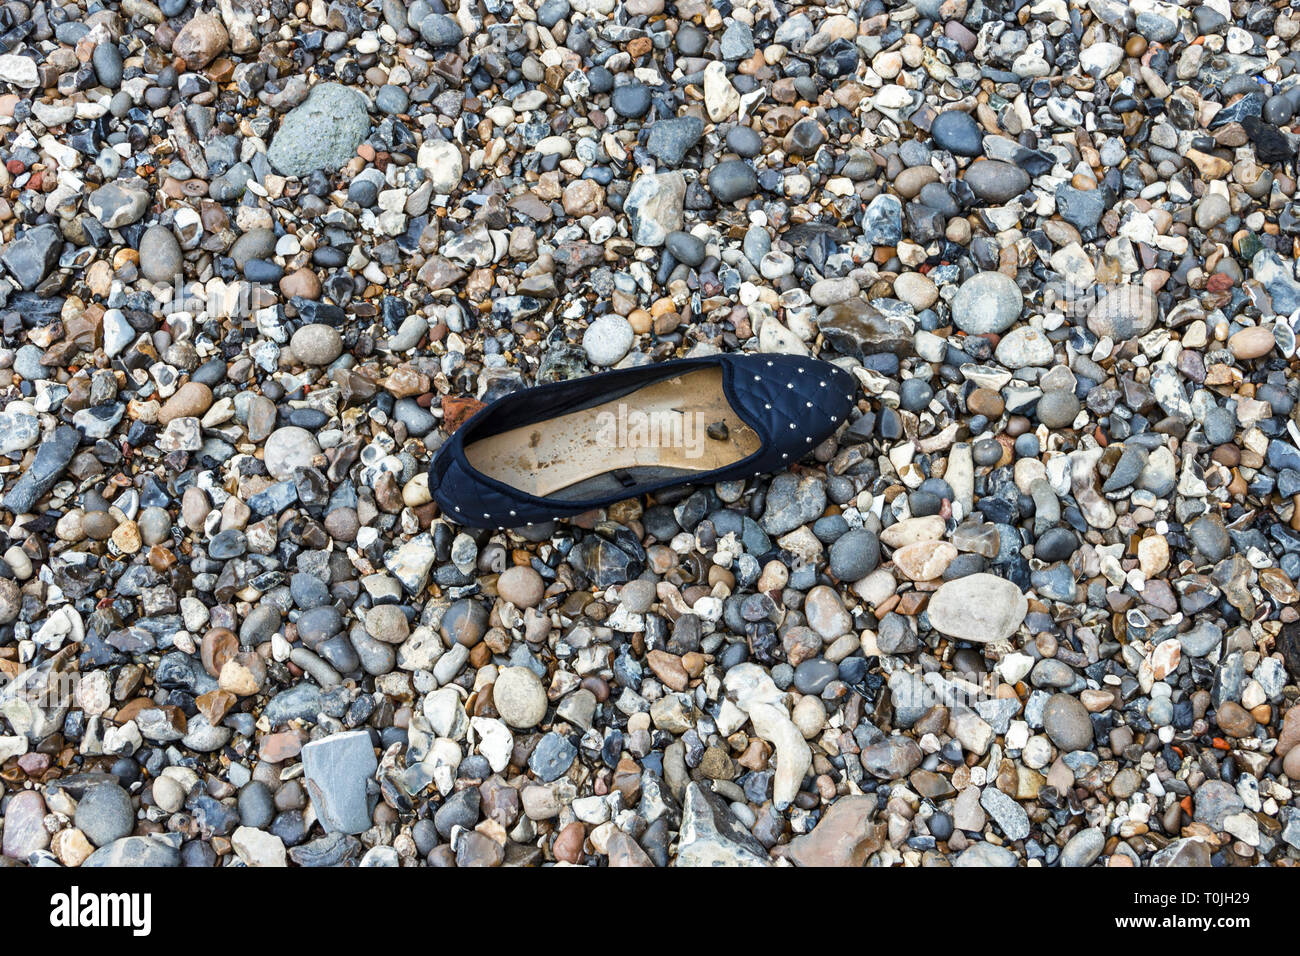 A woman's fancy shoe washed up on the stony shore of the River Thames in London, UK Stock Photo